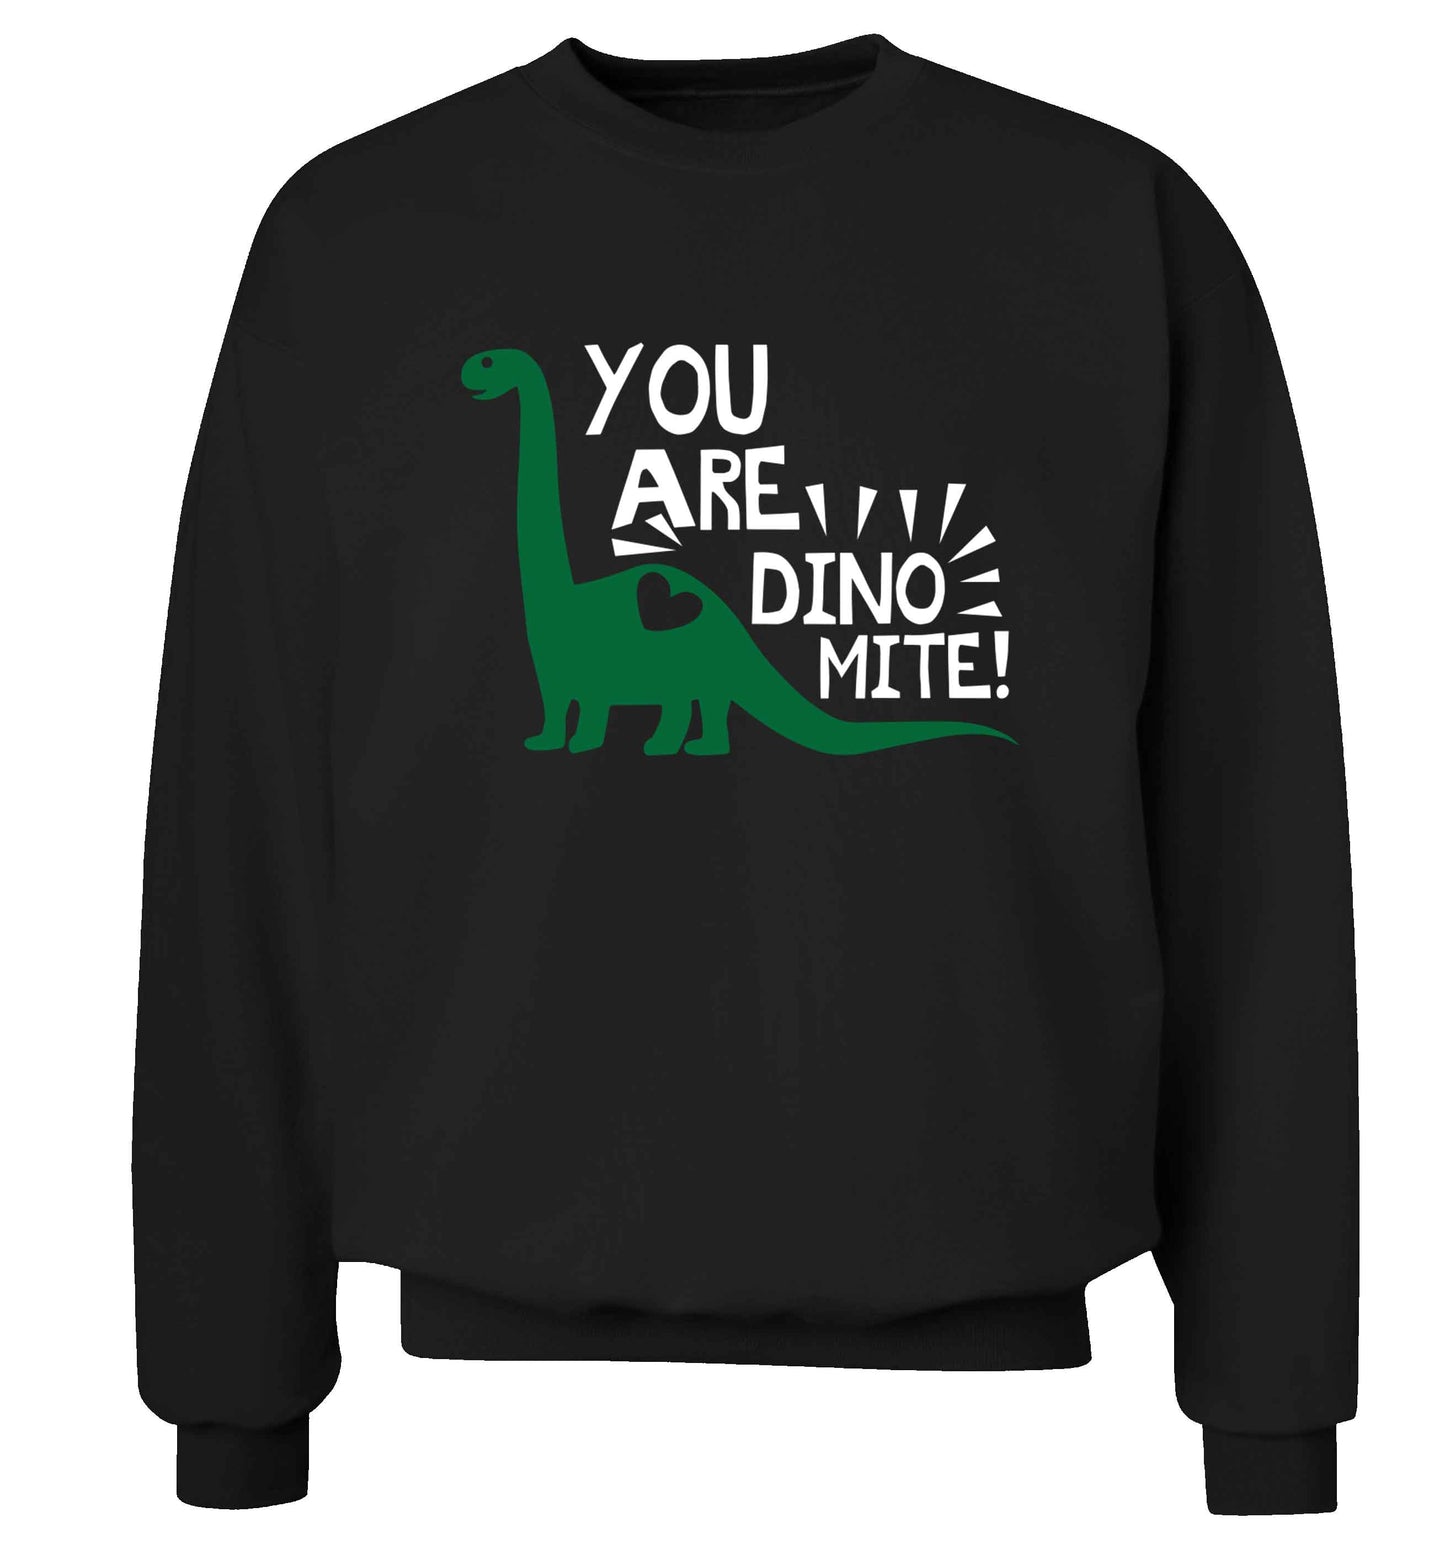 You are dinomite! Adult's unisex black Sweater 2XL